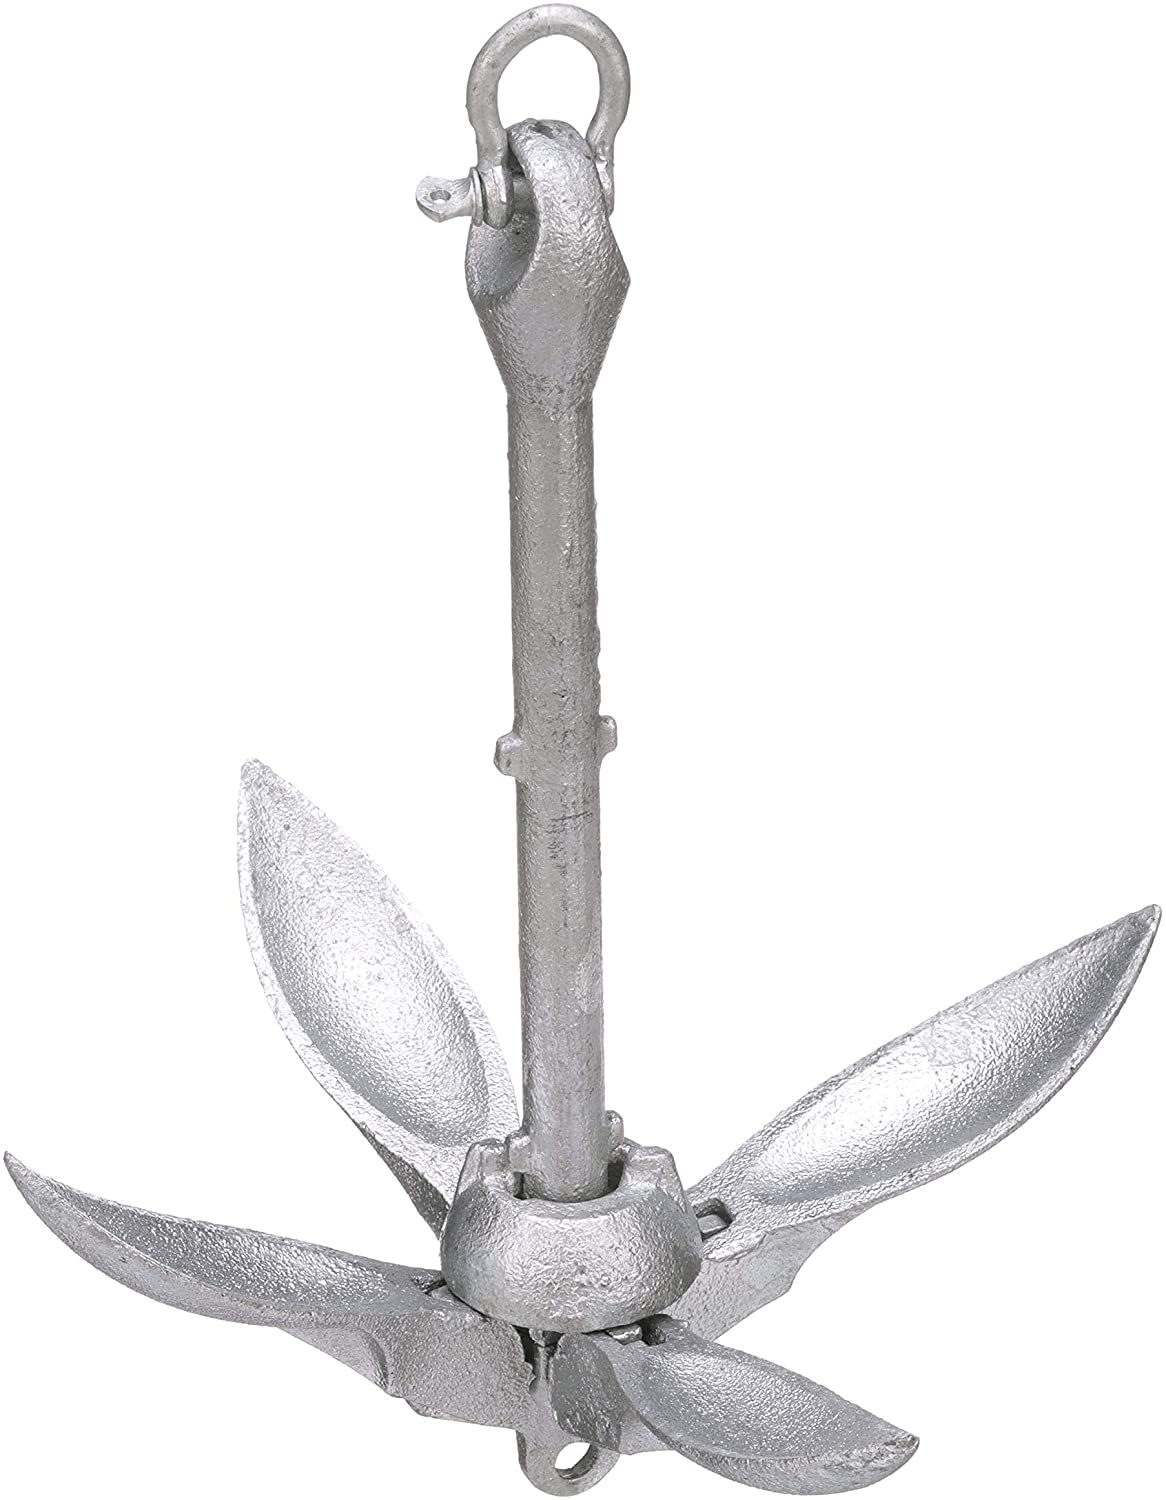 1.5lb Folding Anchor with Shackle